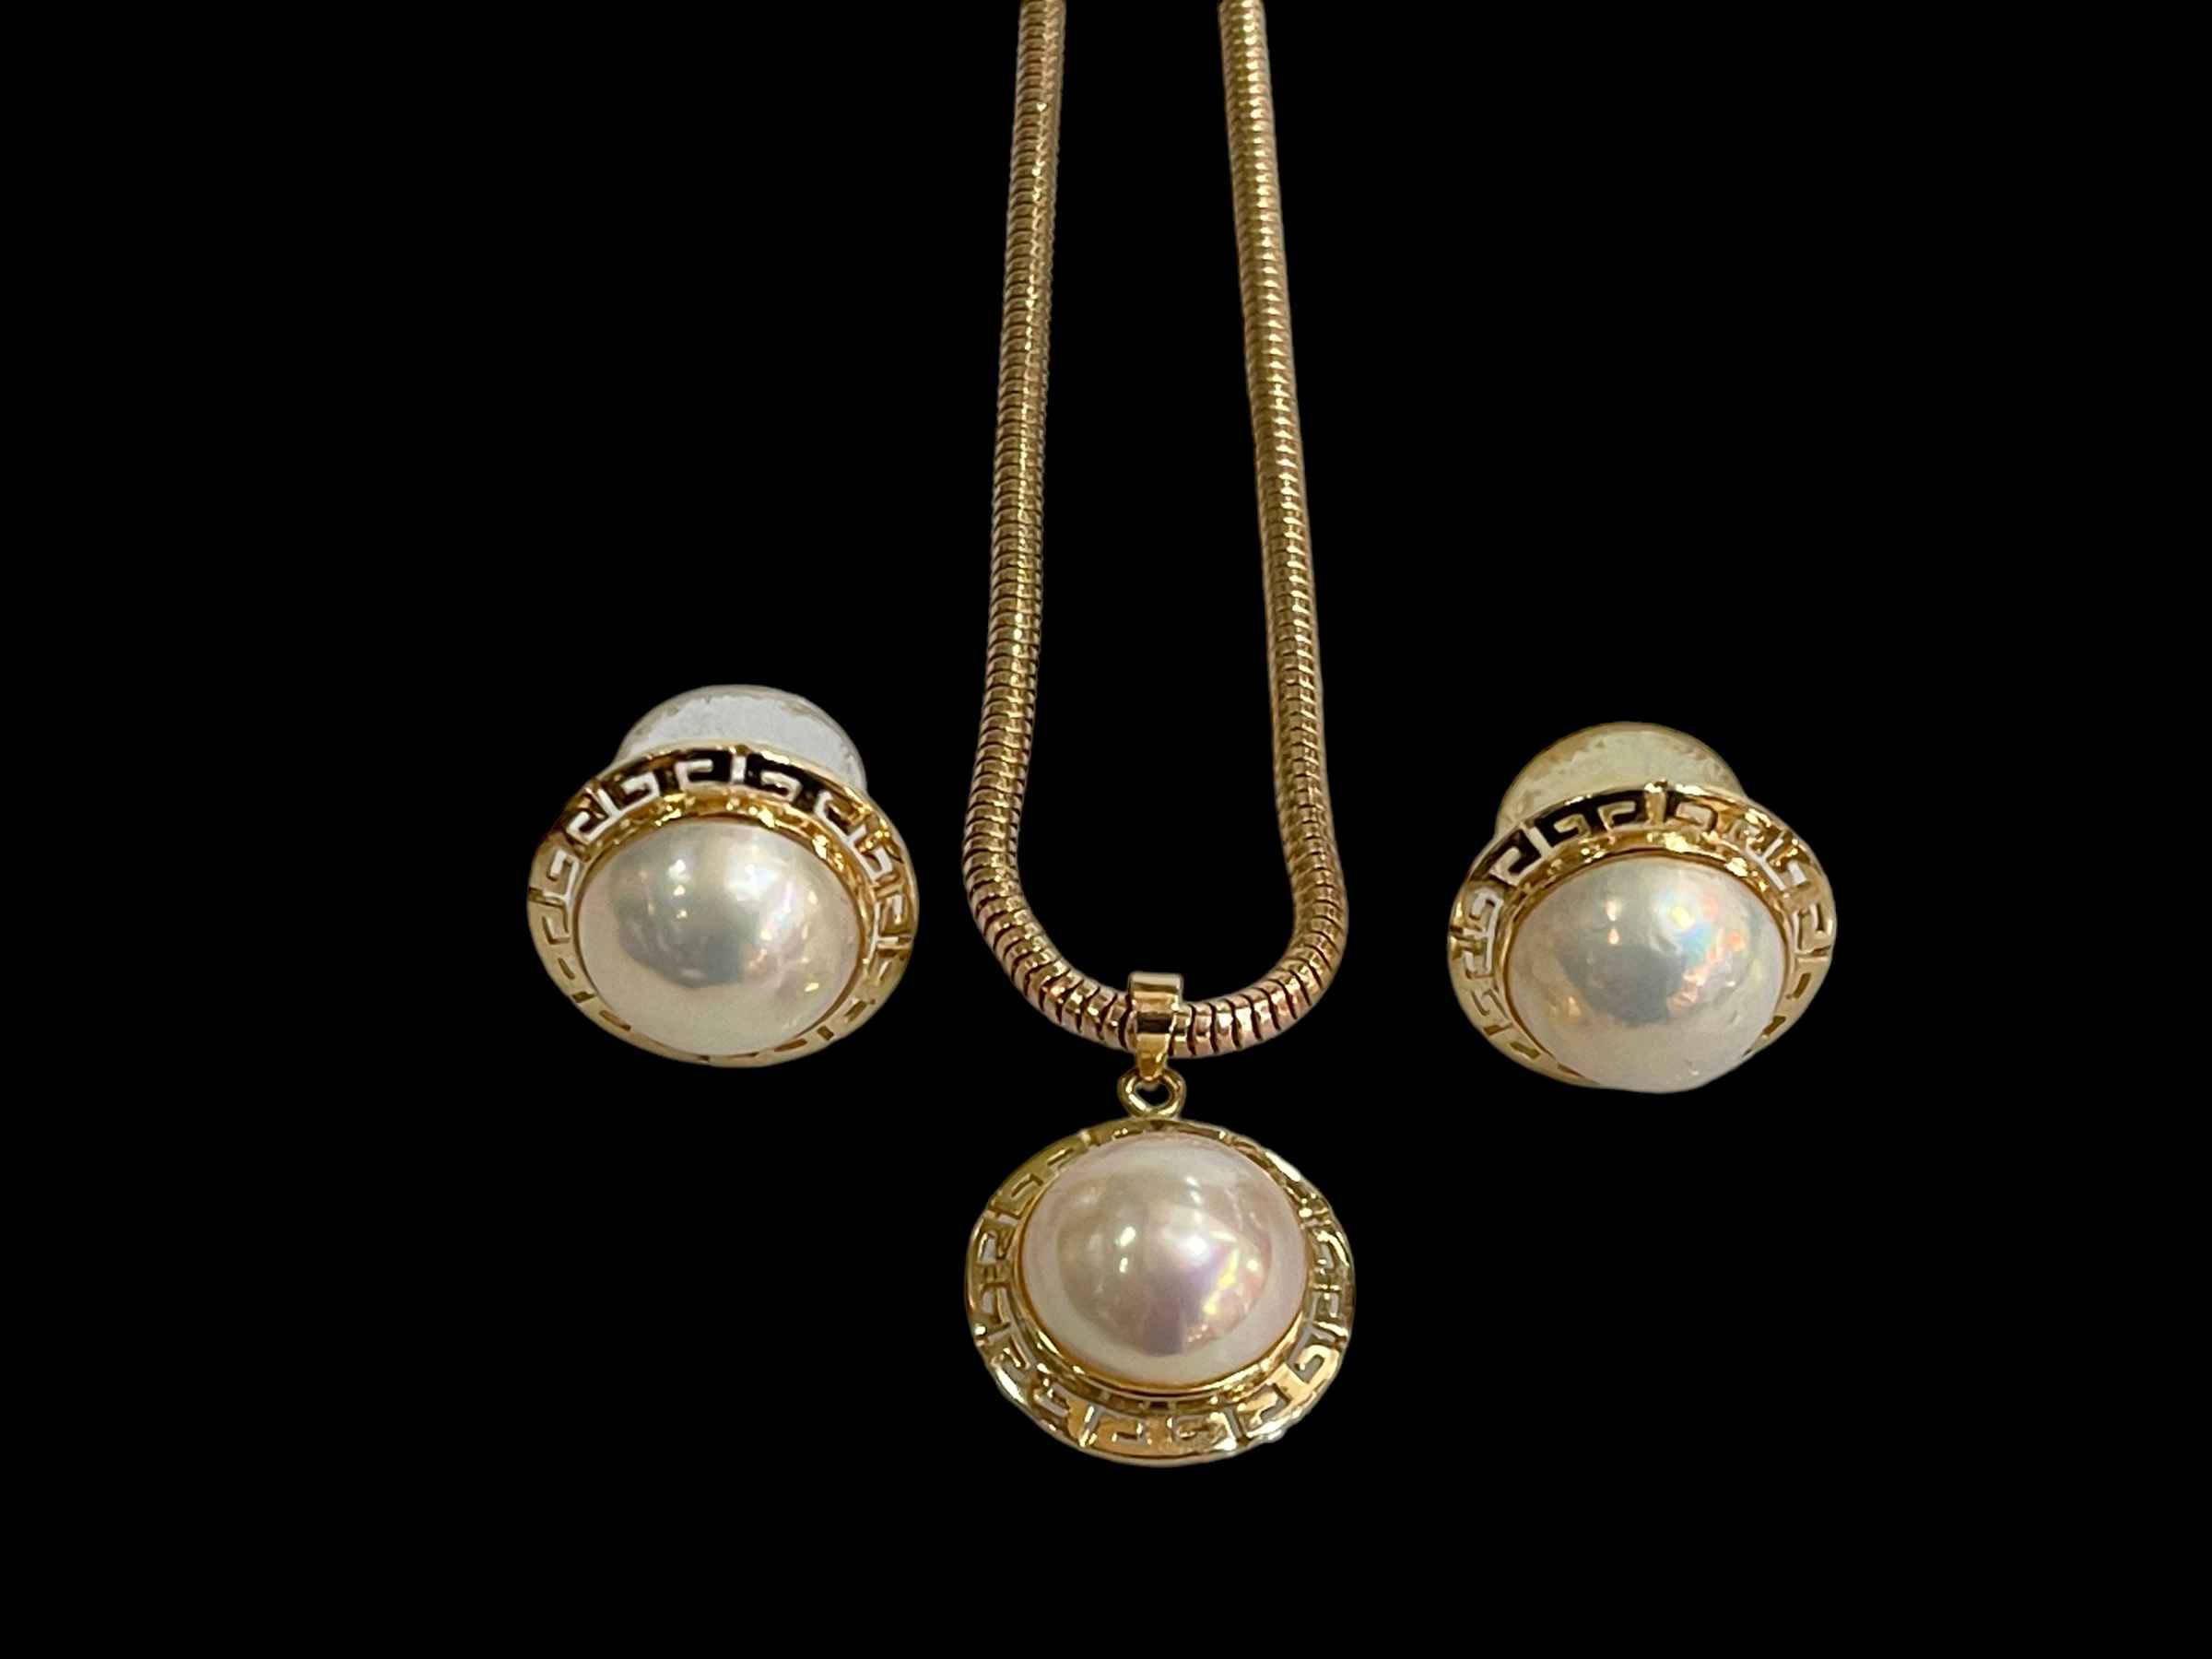 9 carat gold snake chain with pearl style pendant and pair matching earrings.